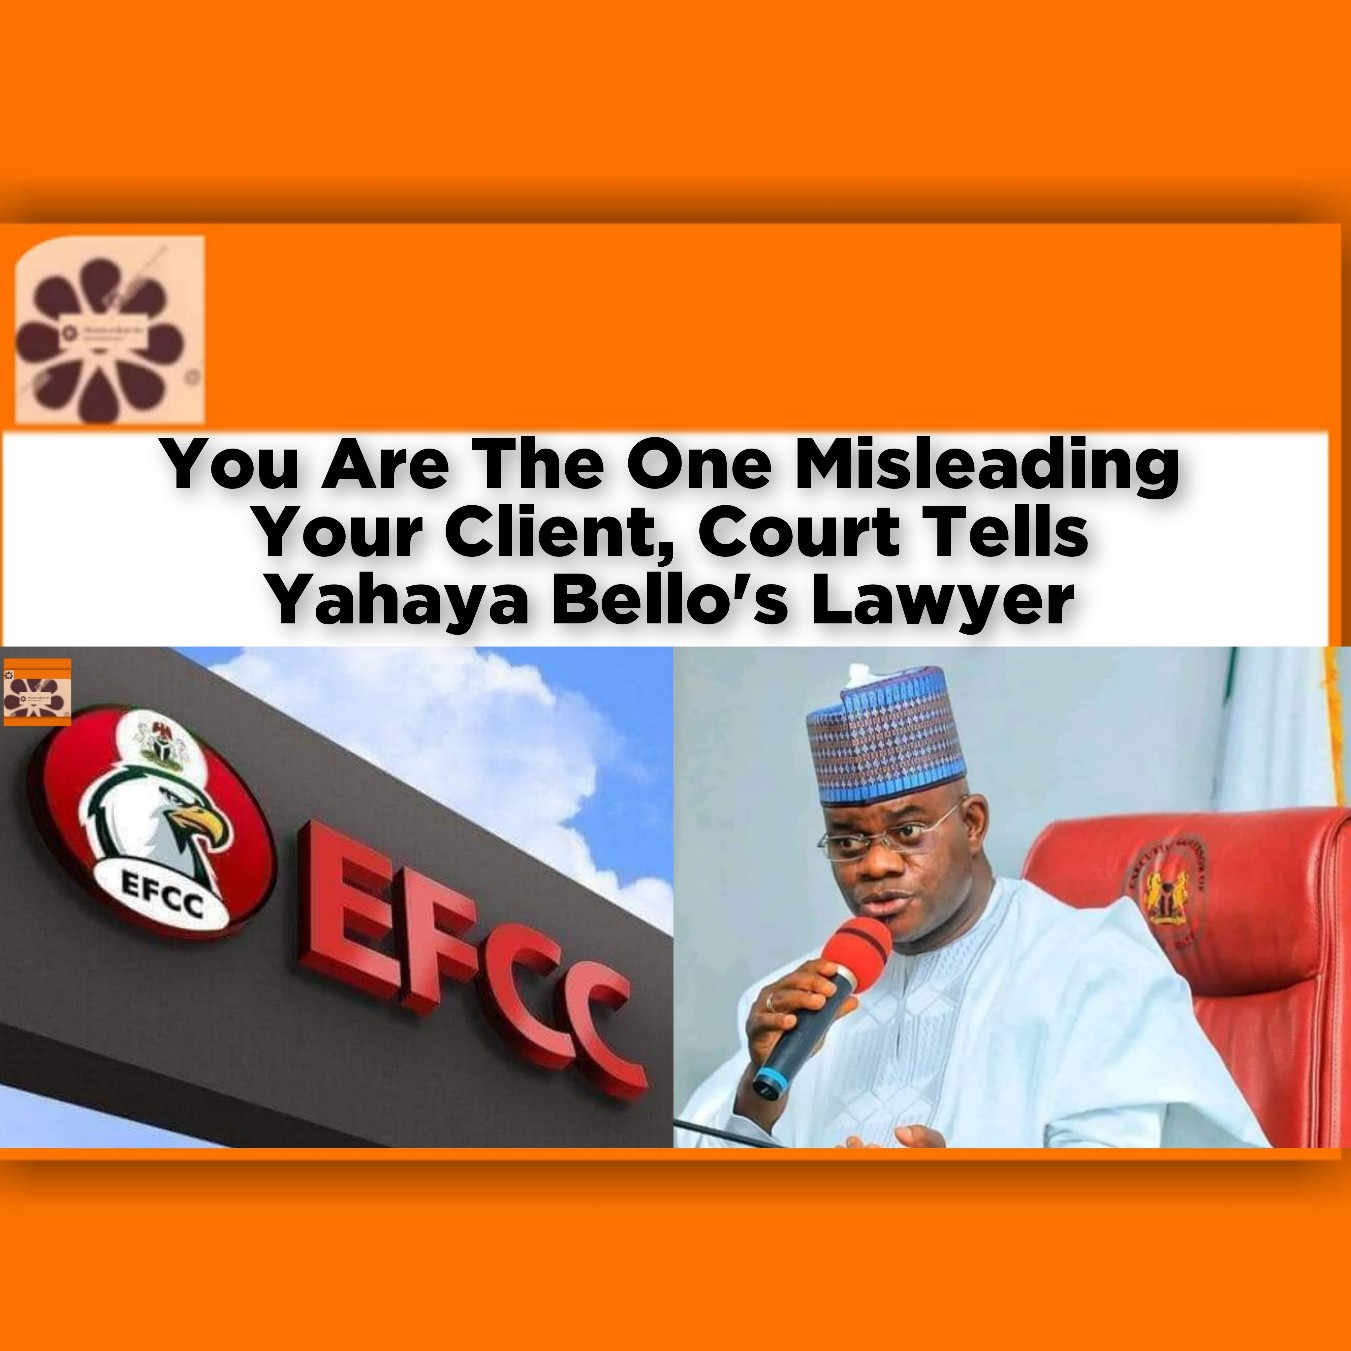 You Are The One Misleading Your Client, Court Tells Yahaya Bello's Lawyer ~ OsazuwaAkonedo #North